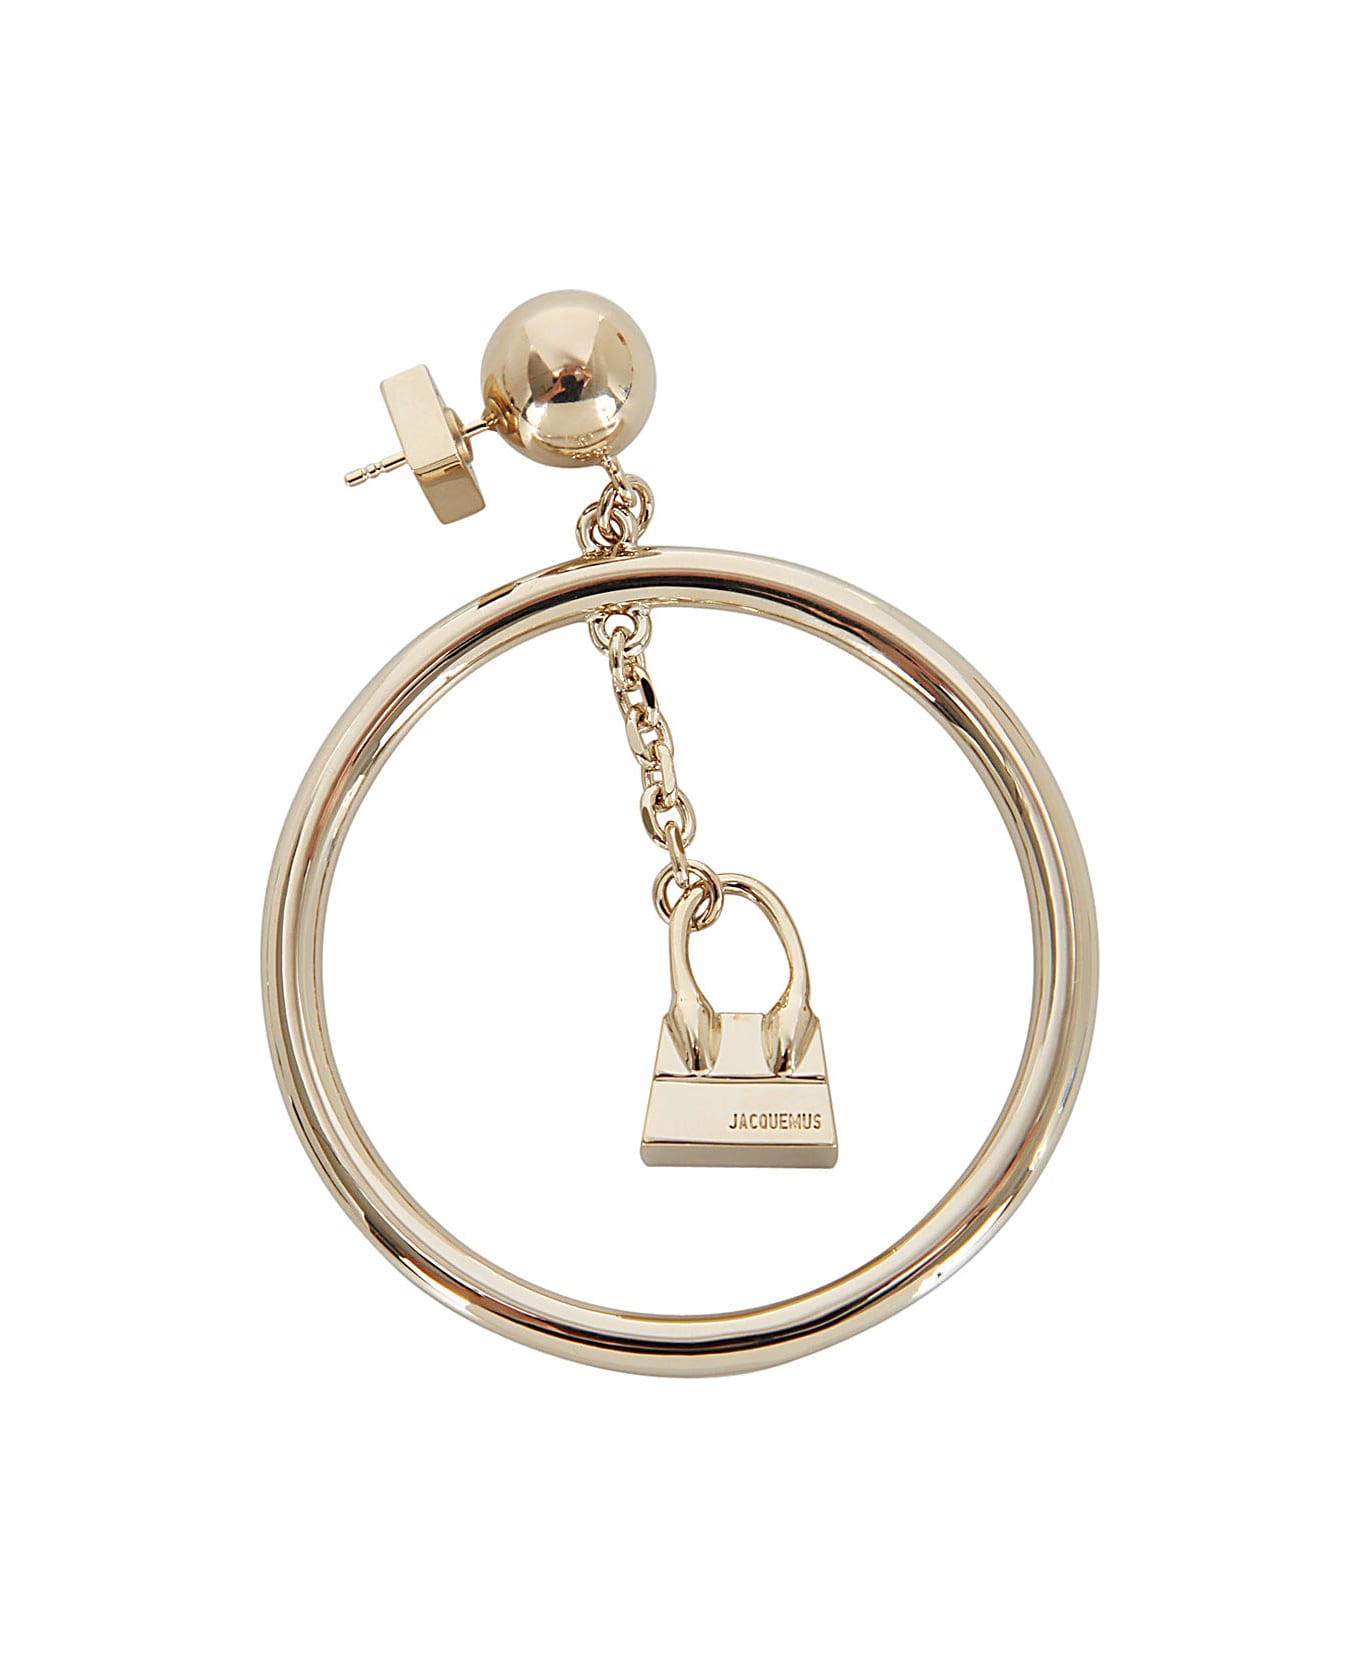 Jacquemus L`anneau Chiquito Earrings With Circle Pendant - Light Gold